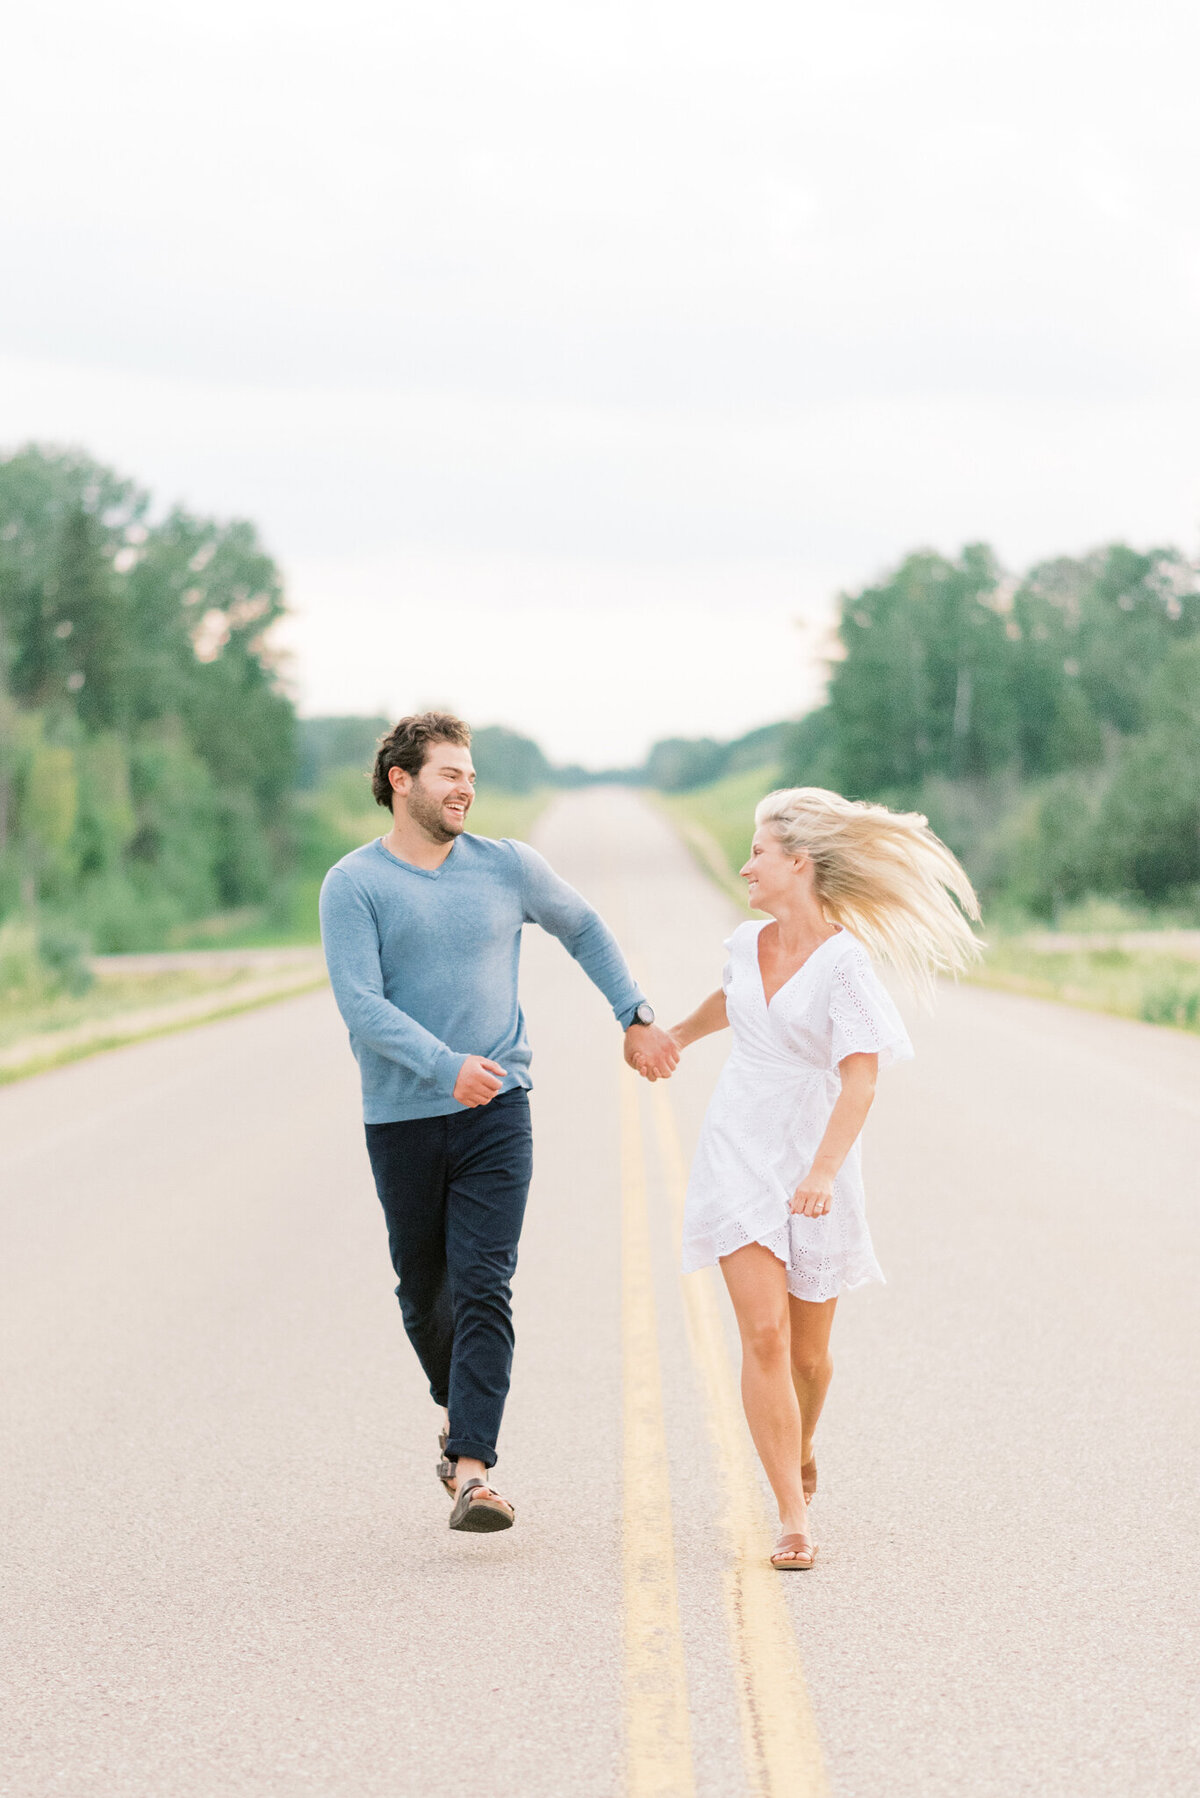 Gorgeous engagement session inspiration in Edmonton, Alberta, couple running on road holding hands.